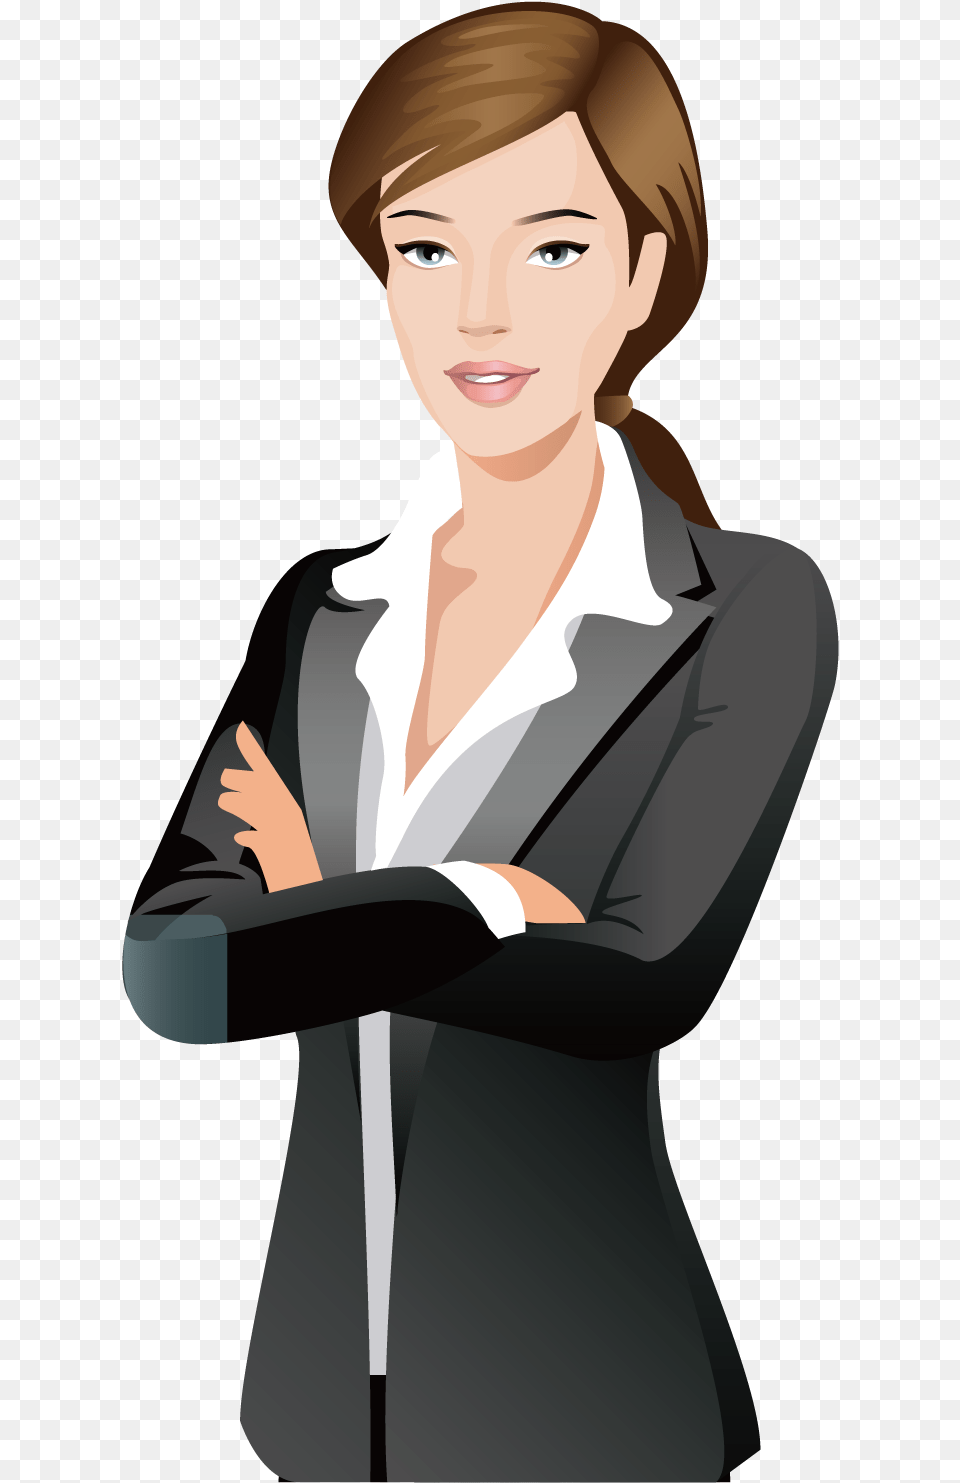 Businessperson Cartoon Silhouette Business Woman Vector, Adult, Suit, Person, Formal Wear Png Image